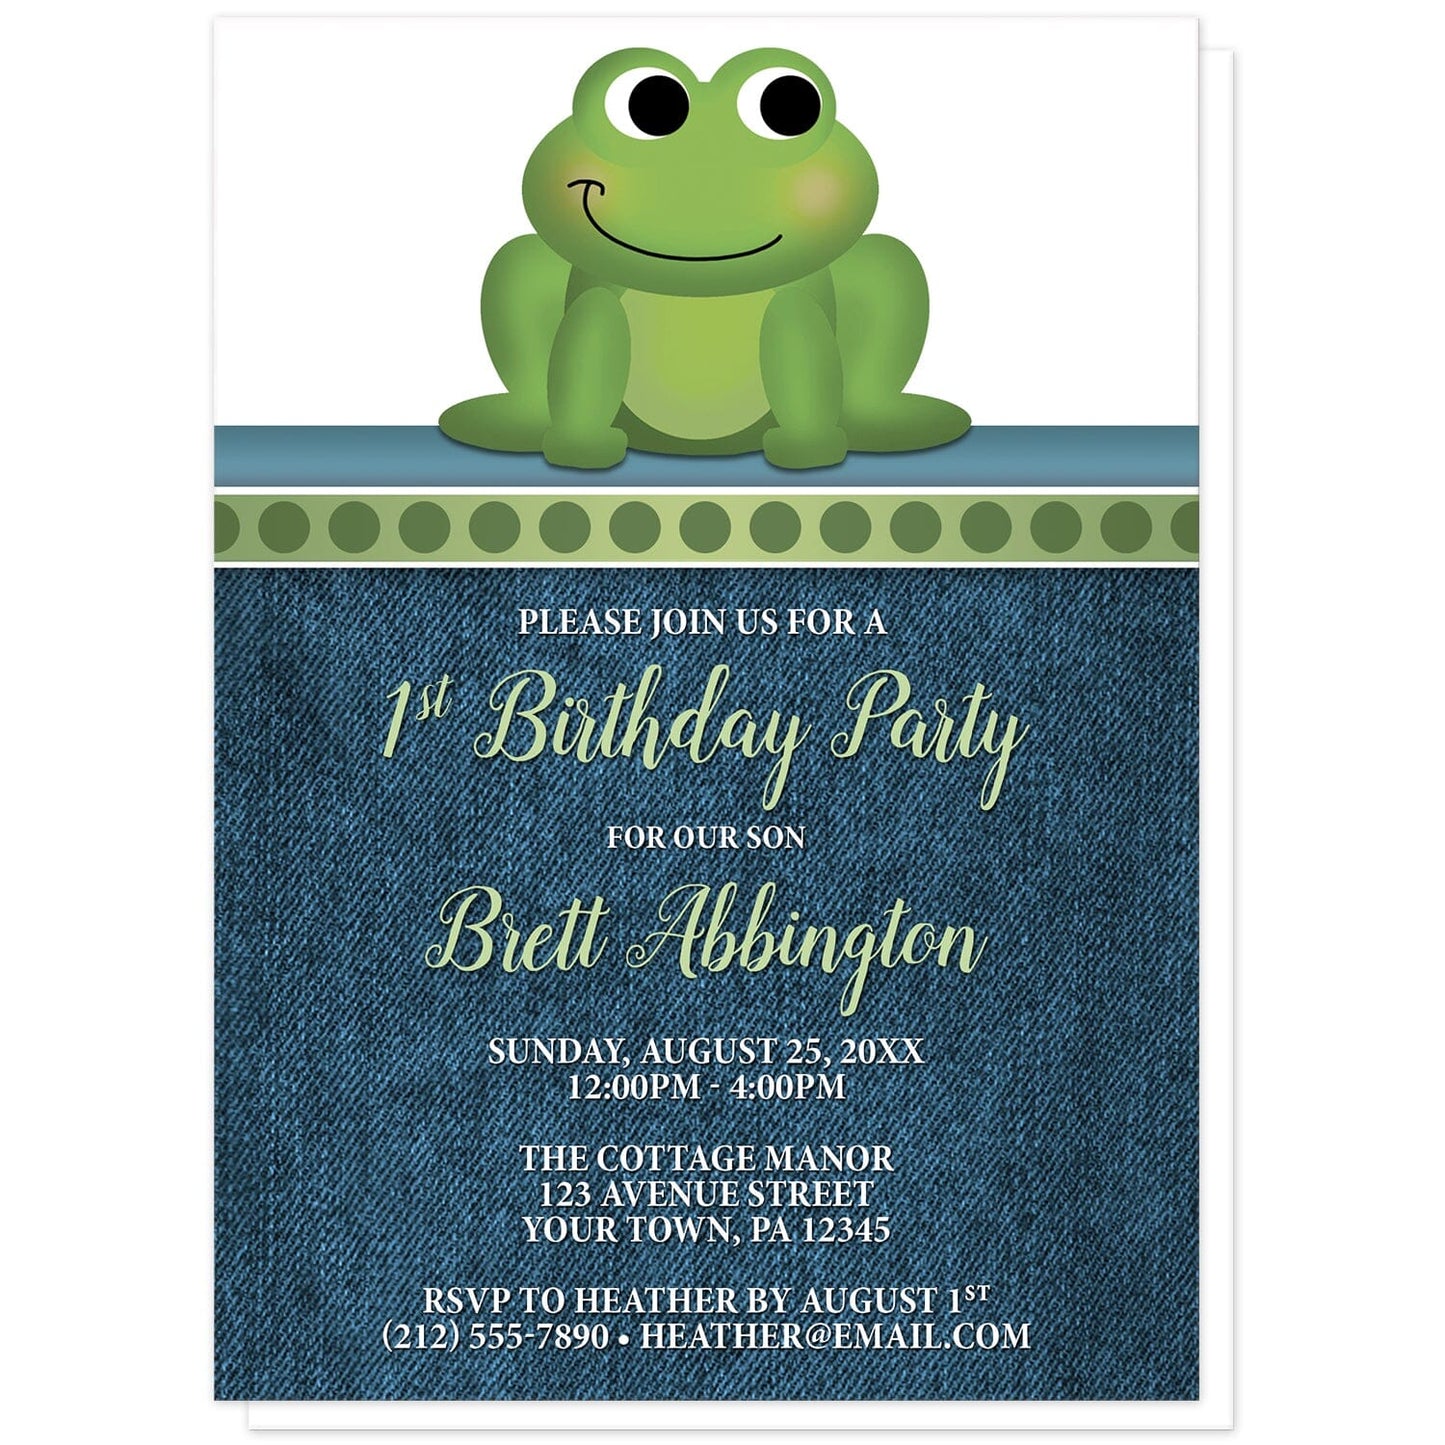 Cute Frog Green Rustic Denim 1st Birthday Invitations at Artistically Invited. Cute frog green rustic denim 1st birthday invitations with an illustration of an adorable smiling green frog. A dotted green border separates the cute frog from your invitation details. The personalized information you provide for the birthday party will be custom printed in green and white over a rustic blue denim background.